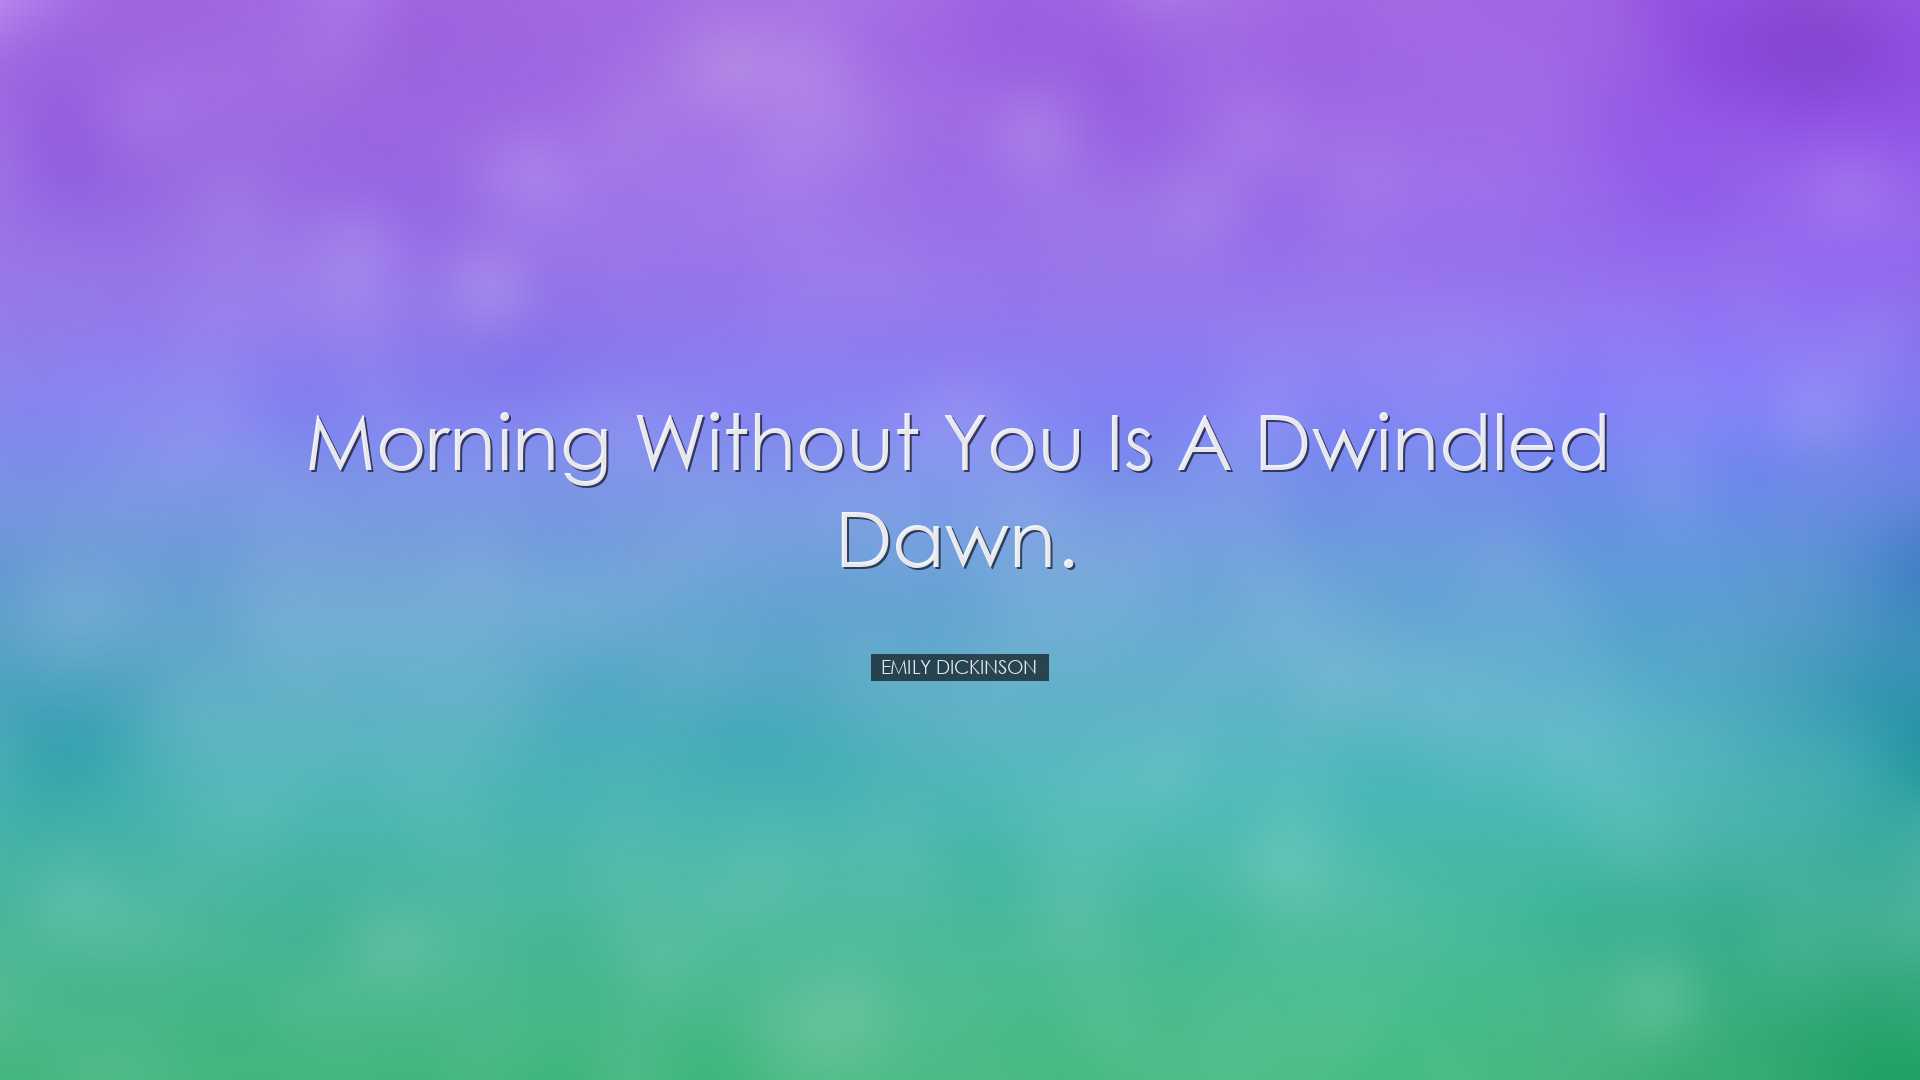 Morning without you is a dwindled dawn. - Emily Dickinson